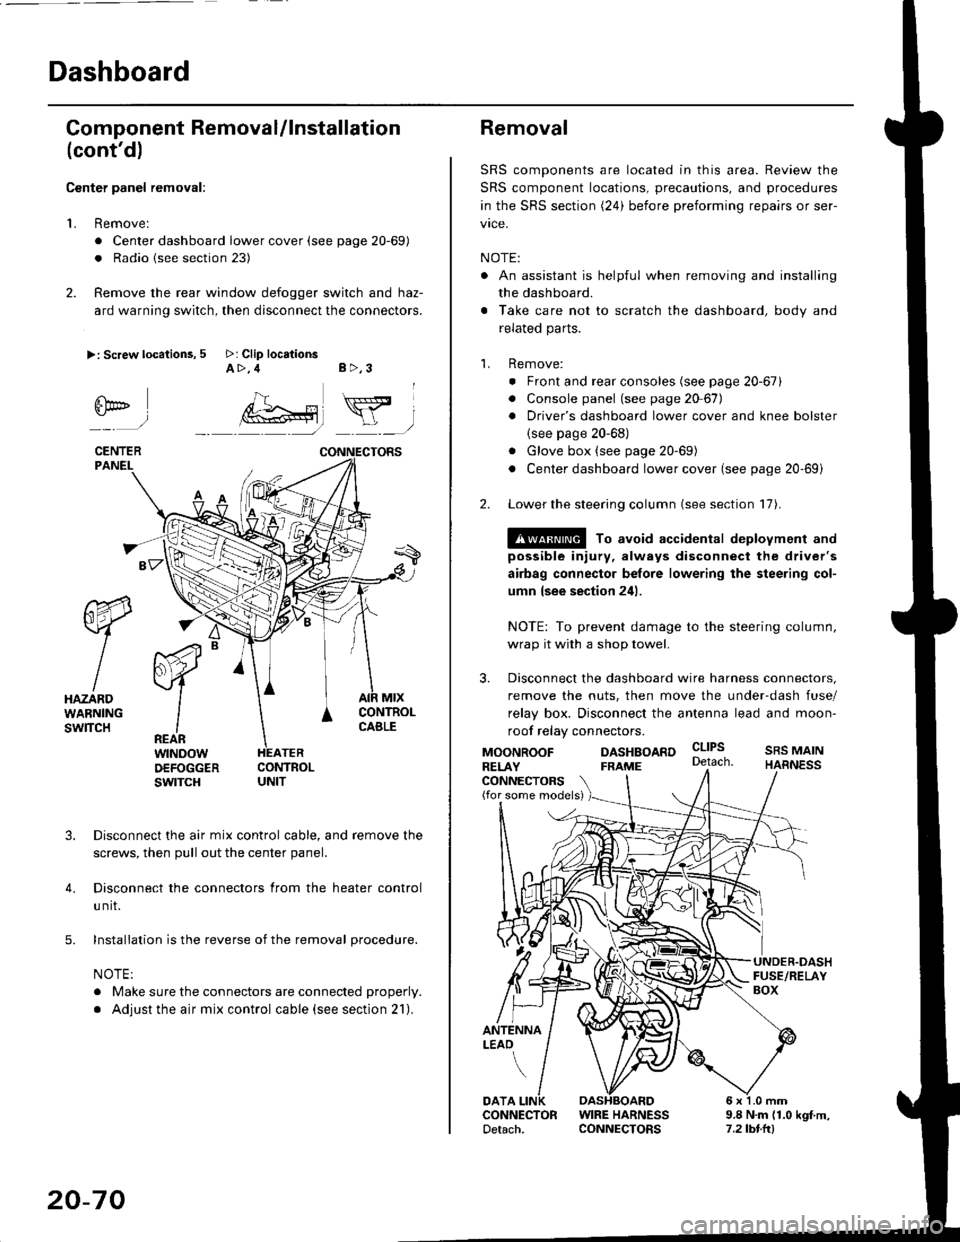 HONDA CIVIC 1999 6.G Workshop Manual Dashboard
Gomponent Removal/lnstallation
(contd)
Center panel removal:
1. Remove:
. Center dashboard lower cover (see page 20-69)
. Radio {see section 23)
2. Remove the rear window defogger switch an